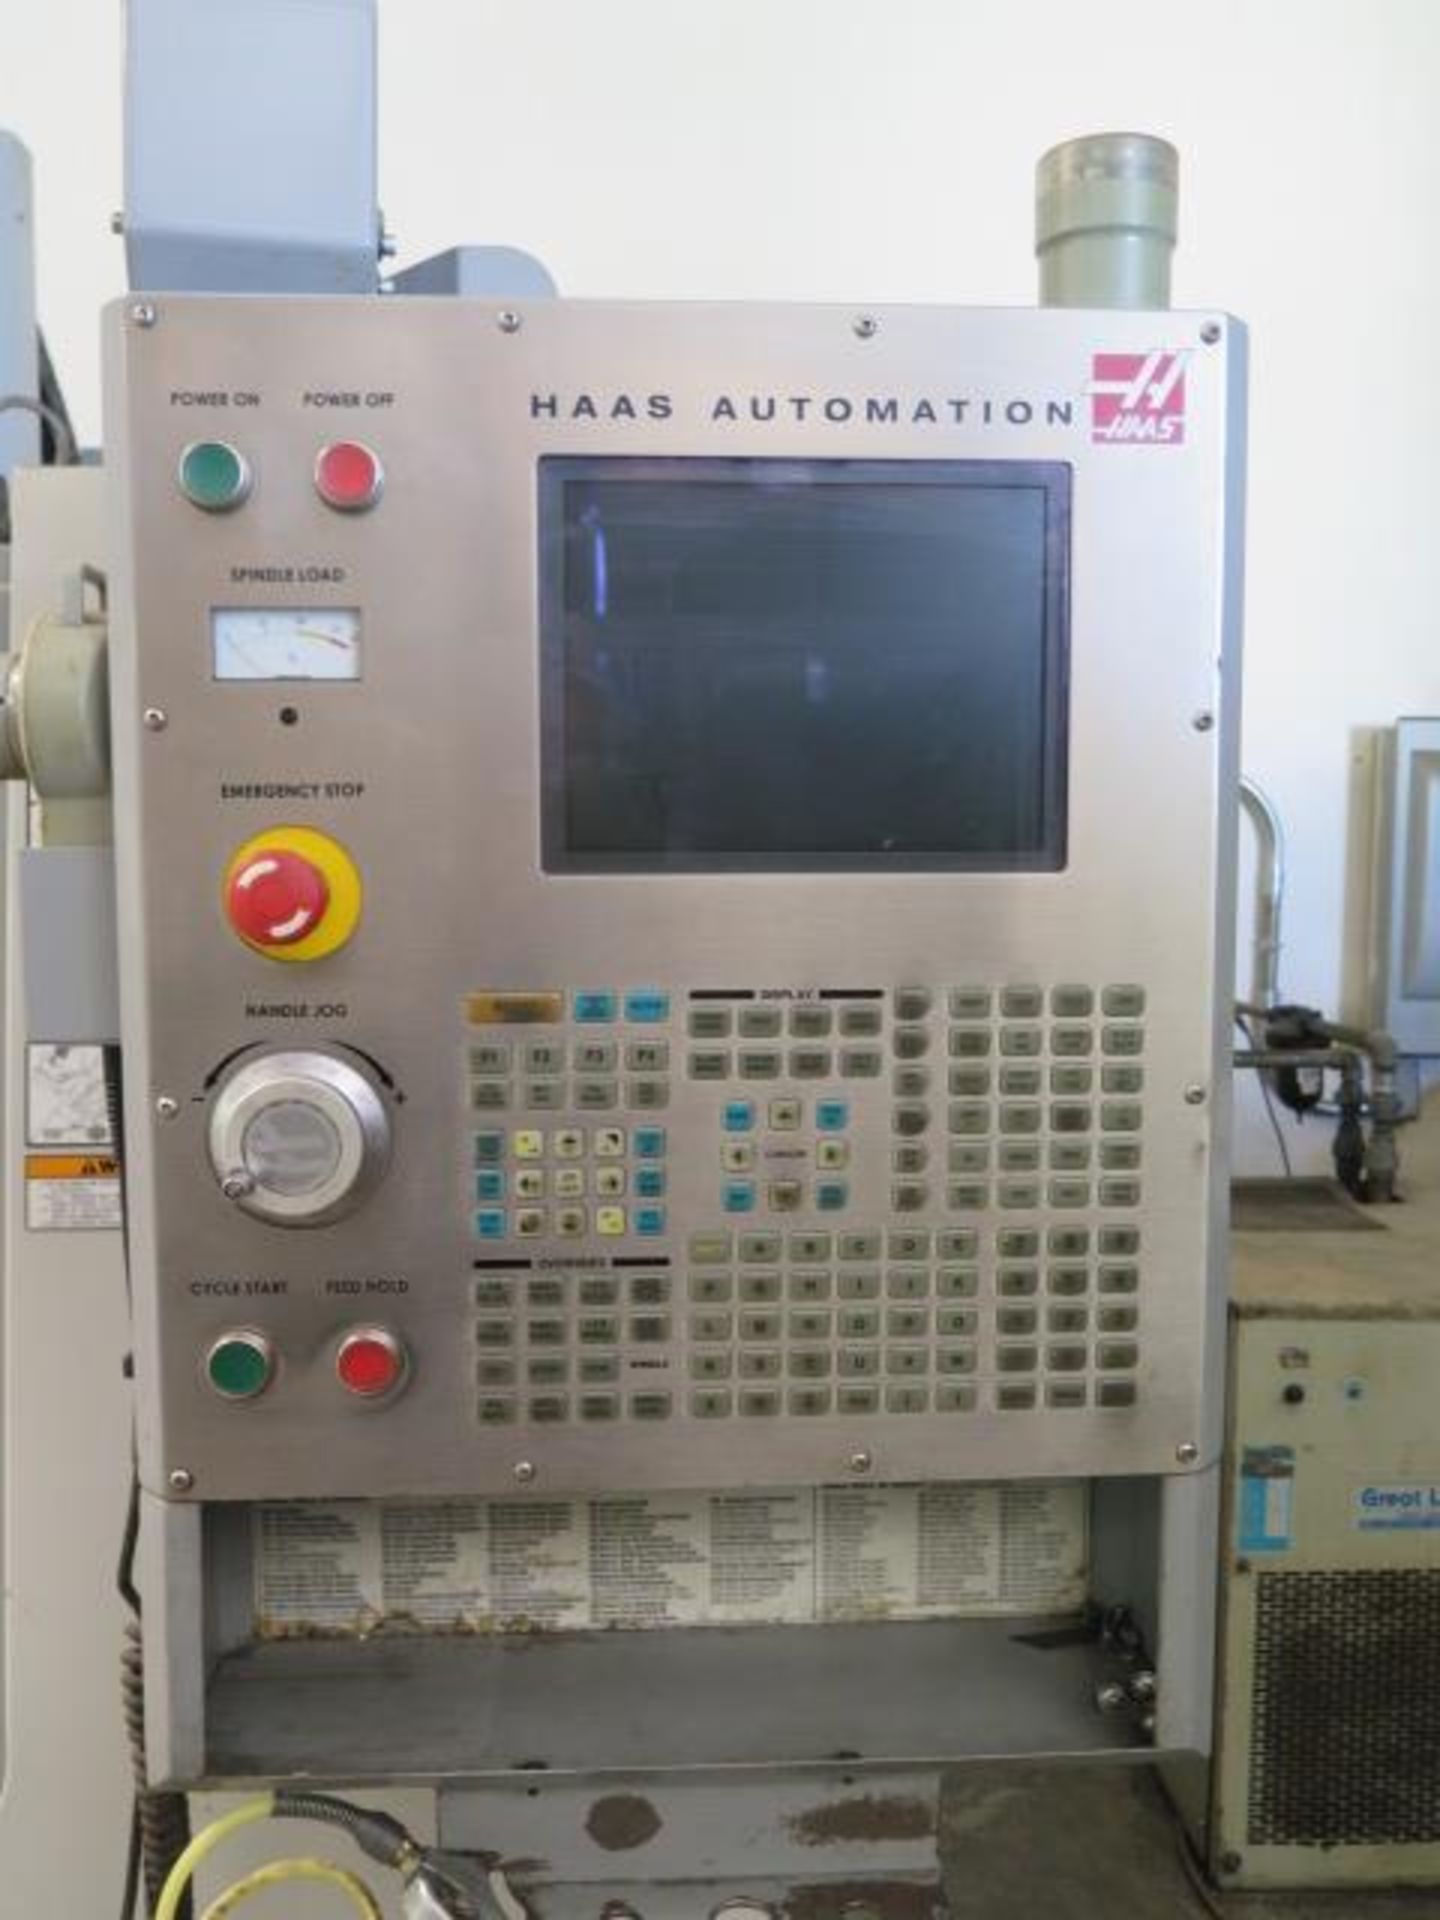 2006 Haas VF-2B 4-Axis CNC VMC s/n 48111 w/ Haas Controls, Hand Wheel, 24-Station ATC, SOLD AS IS - Image 5 of 18